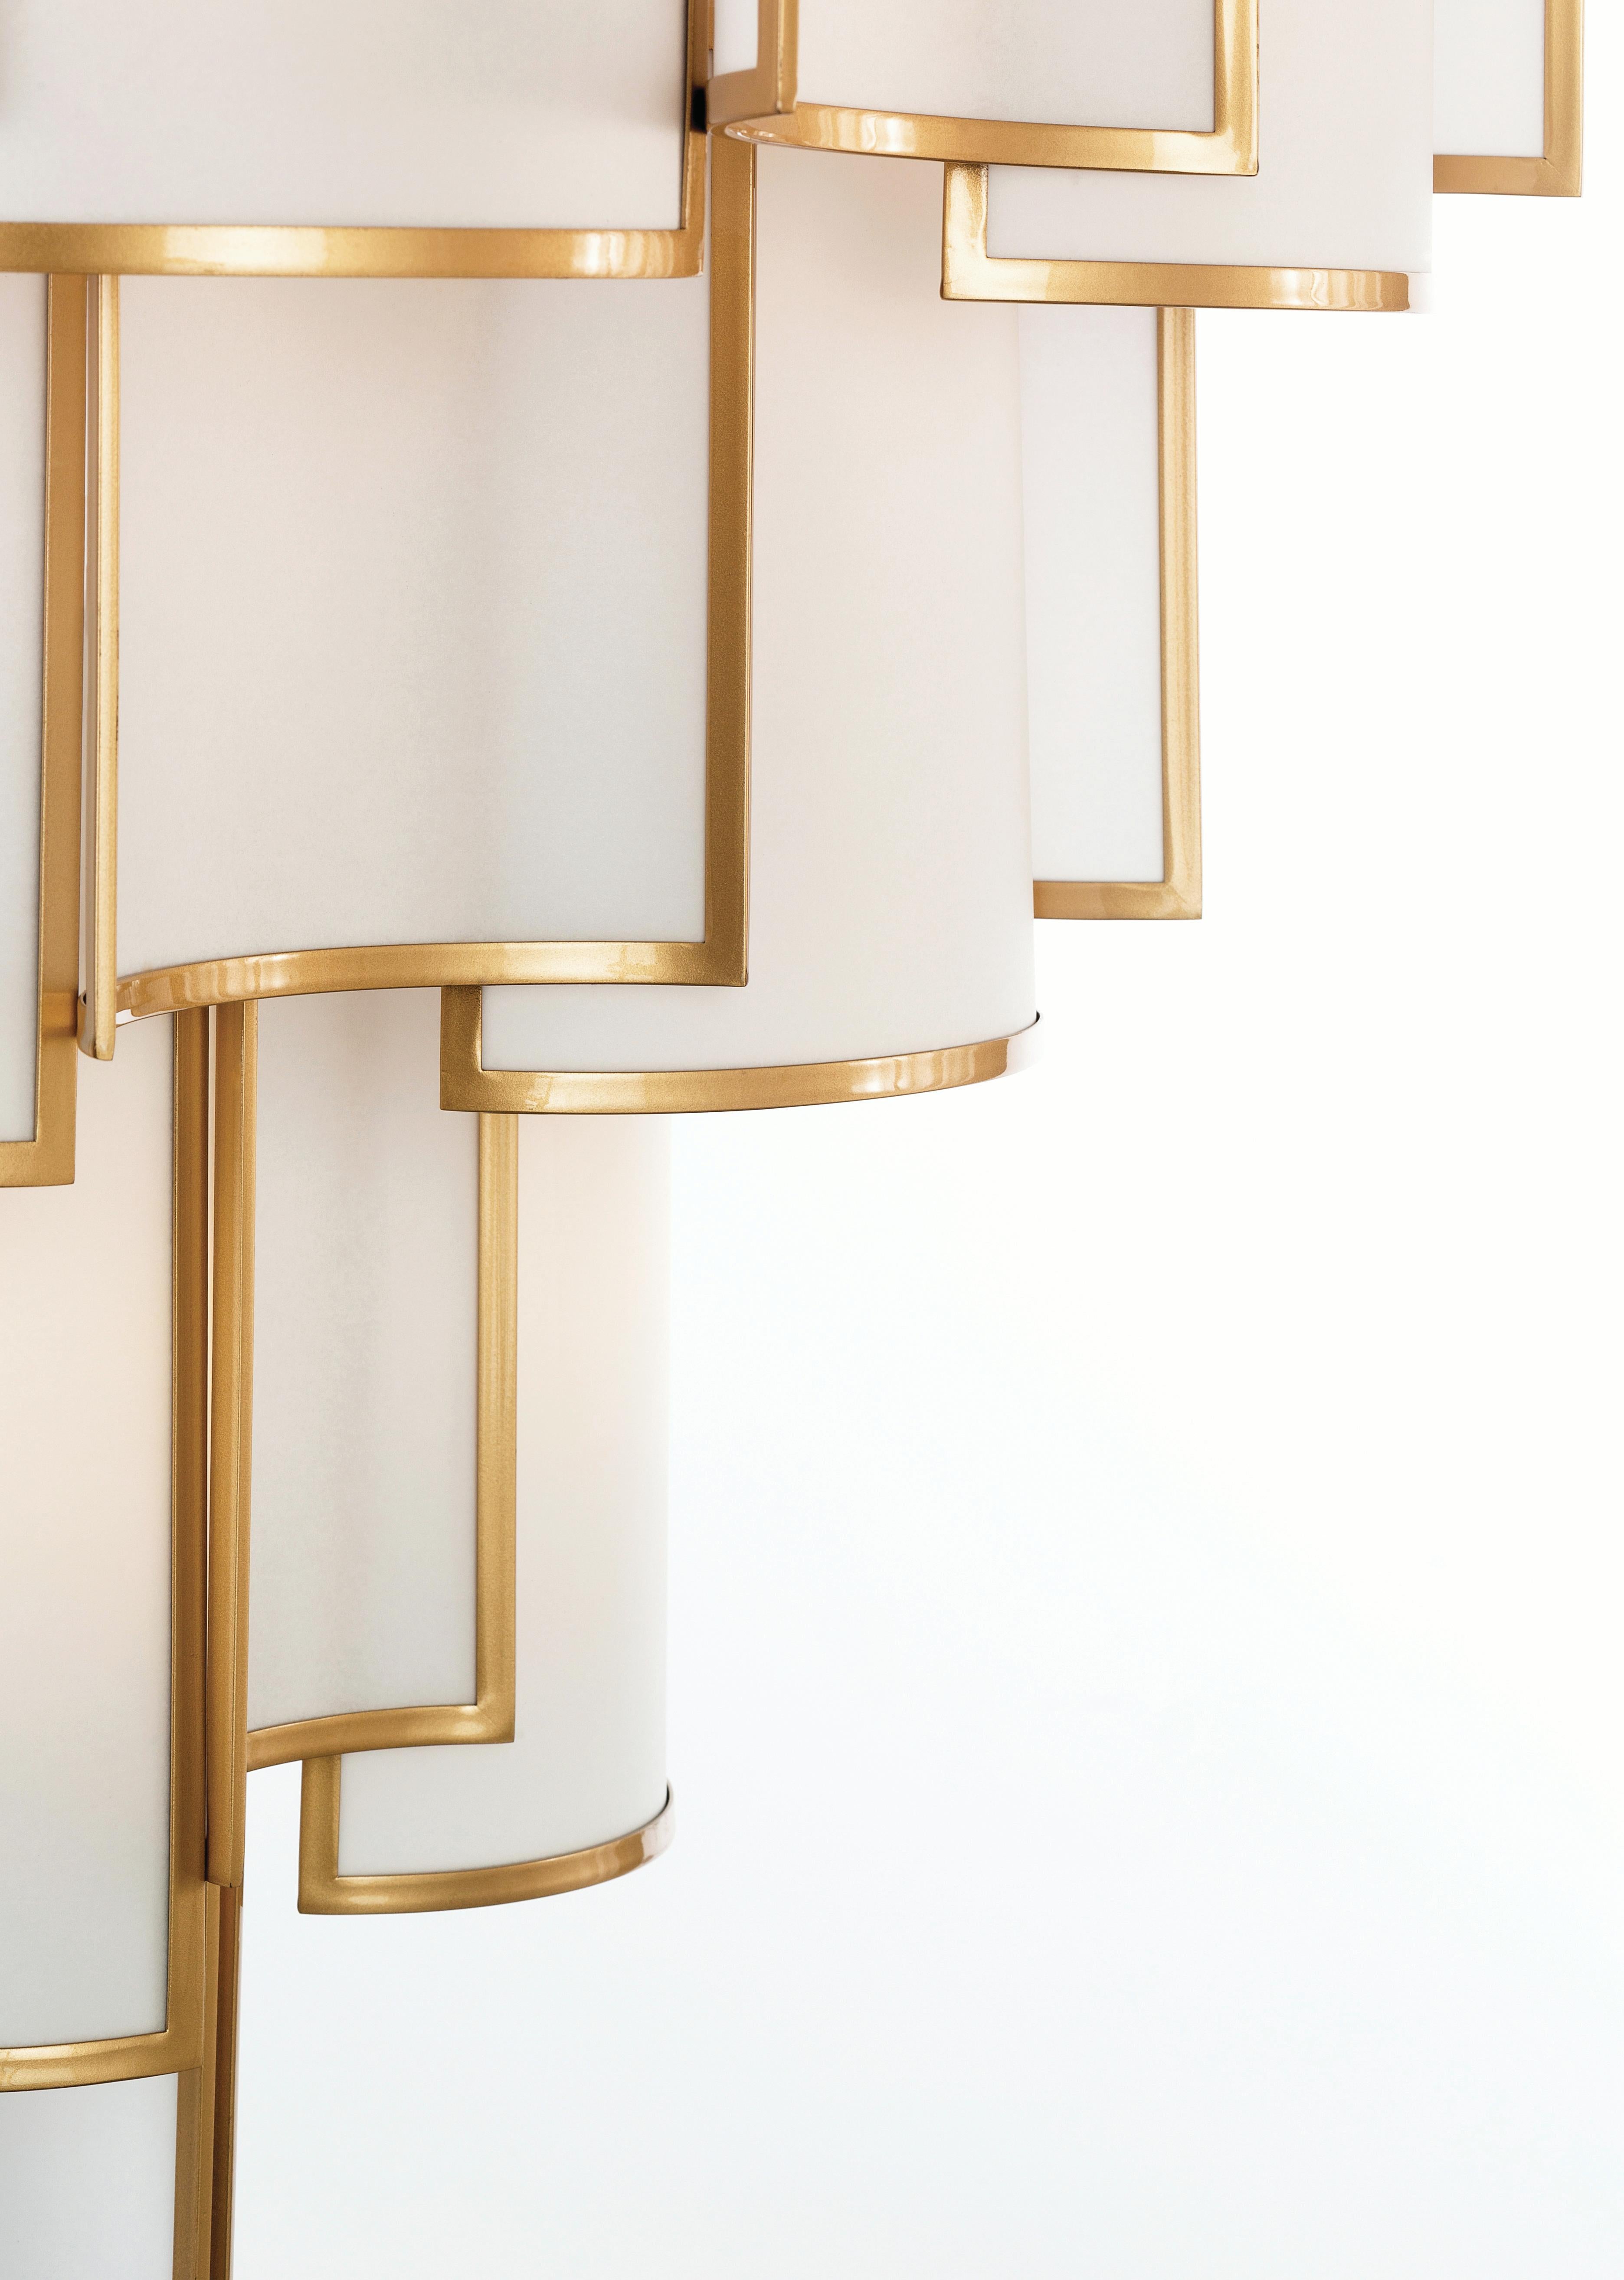 SHADE Collection - A composition of small curved framed panels that create a luminous movement, also available in other finishes & fabrics, as well as sizes. All Officina Luce items are customizable.

Main structure in natural brass in satin gold